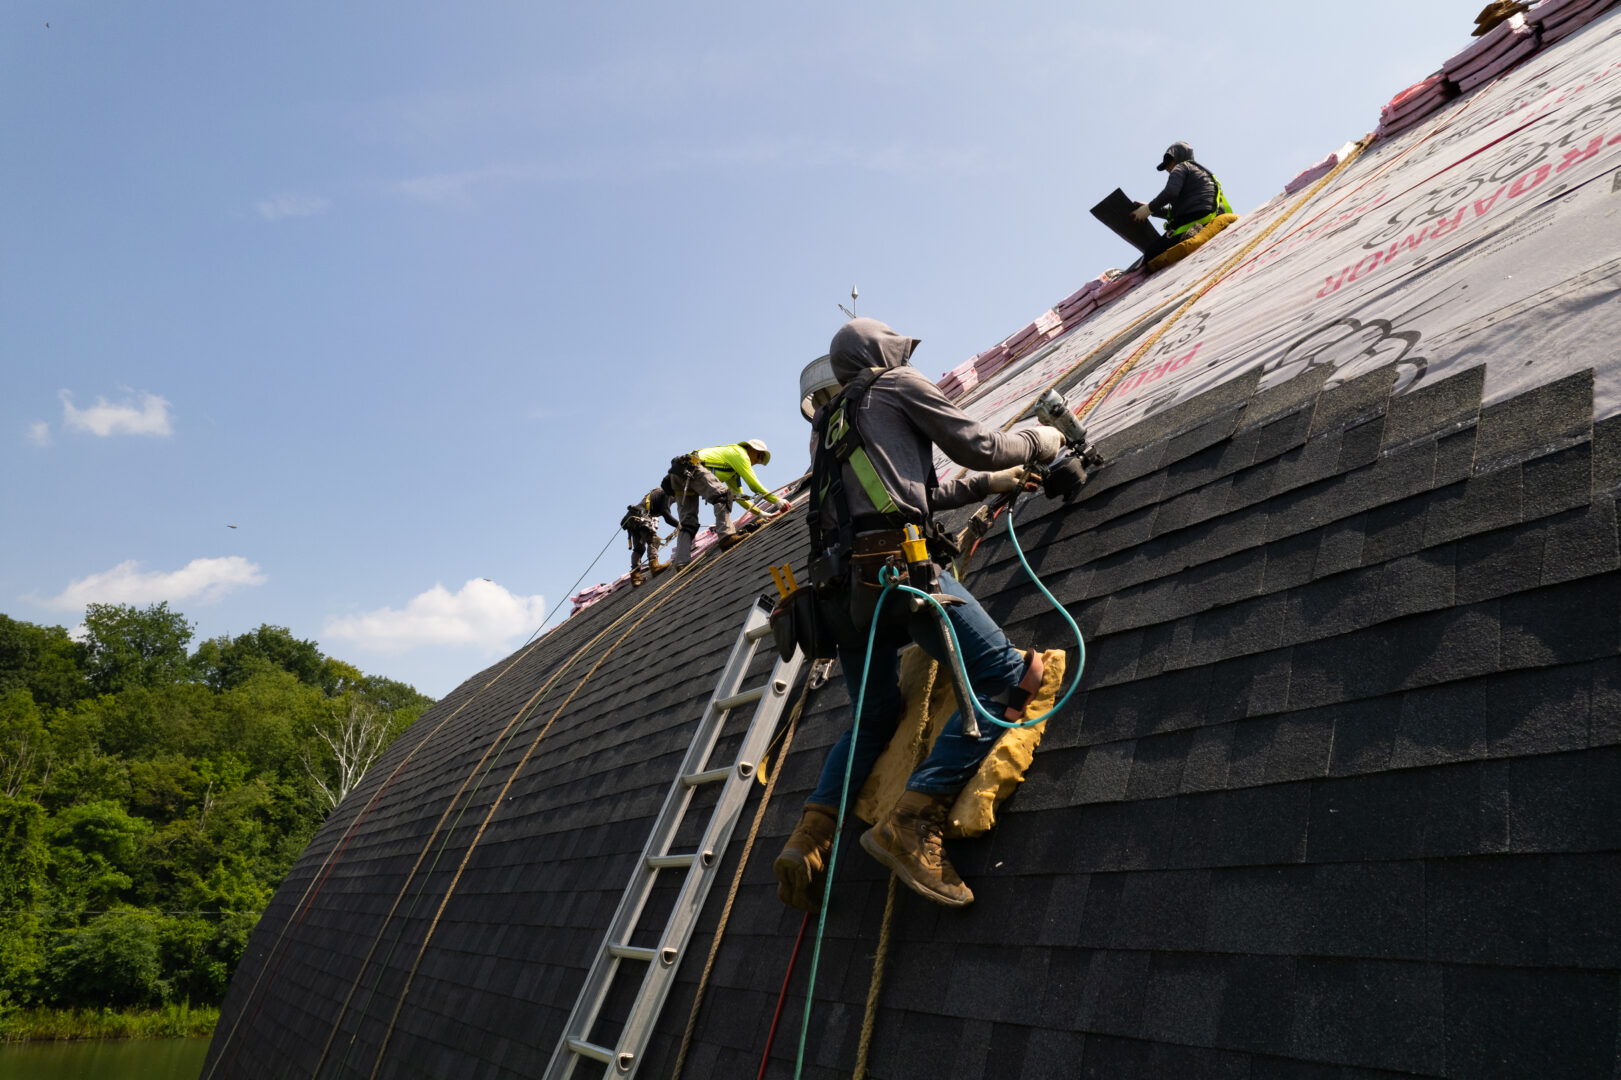 Roofer putting shingles on a roof and wearing appropriate PPE